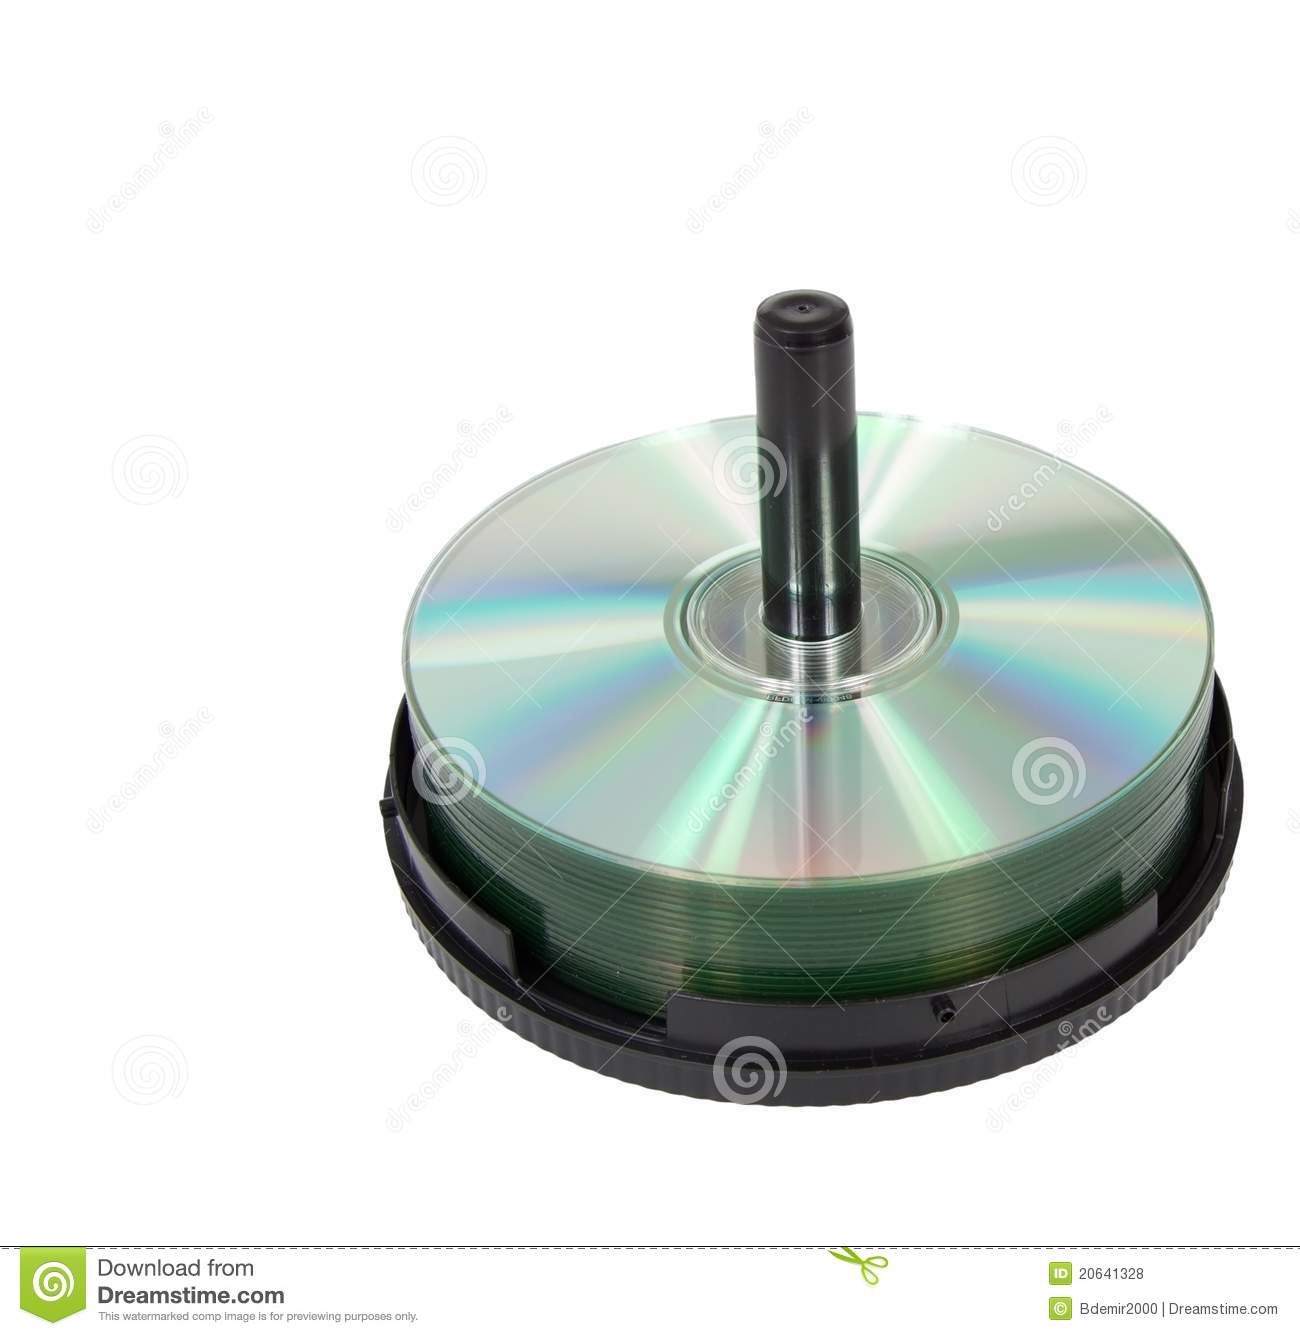 Cd Dvd Disk Rom Clean Memory Royalty Free Stock Photos   Image